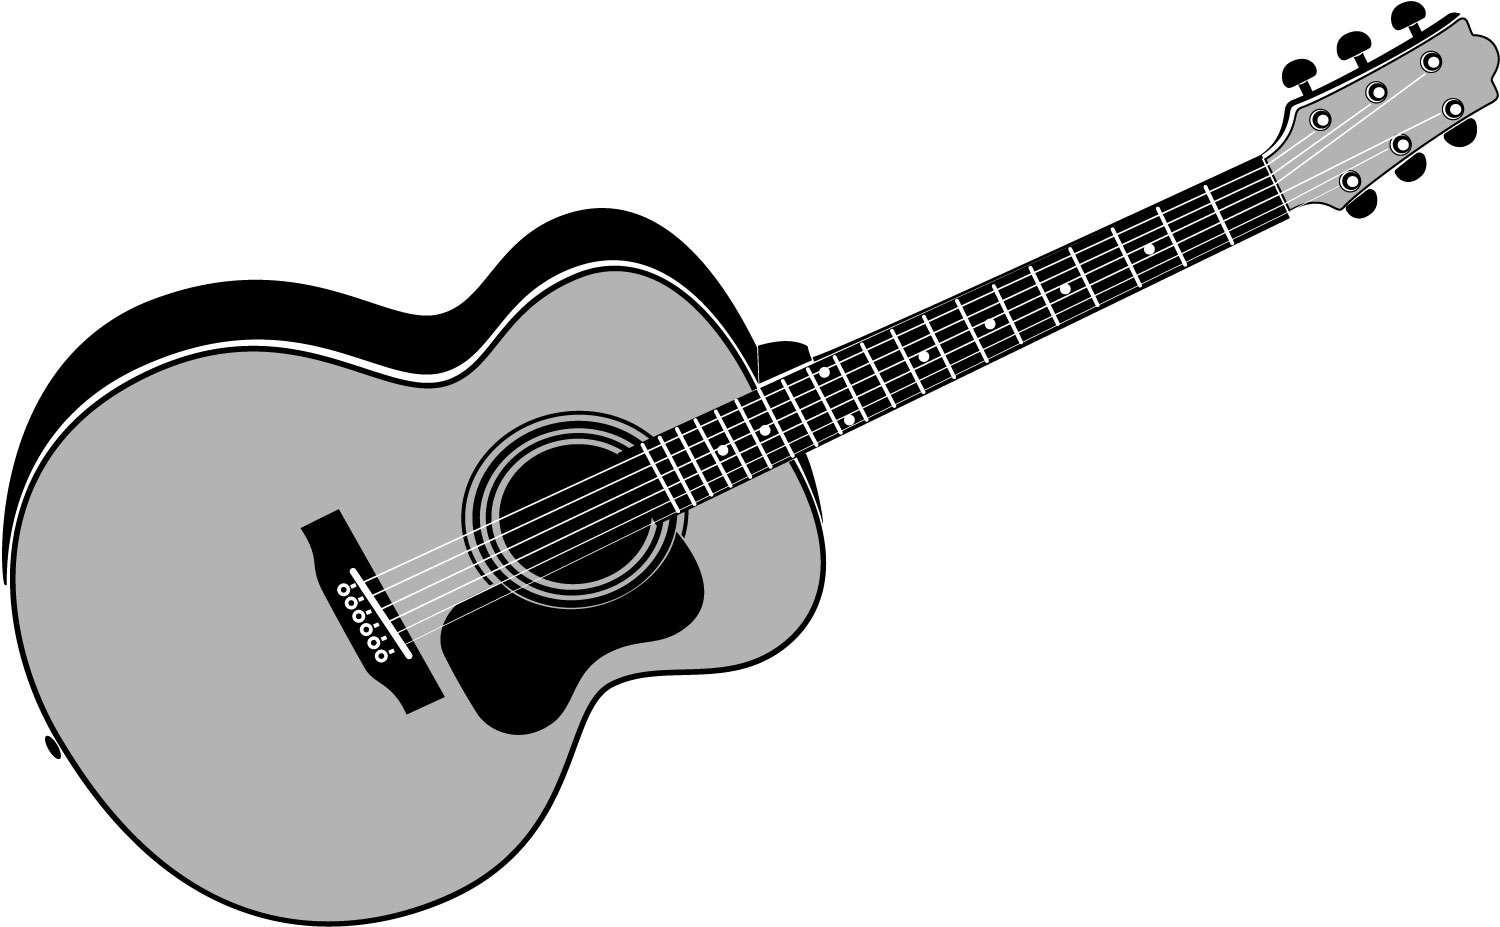 Acoustic guitar band clipart 